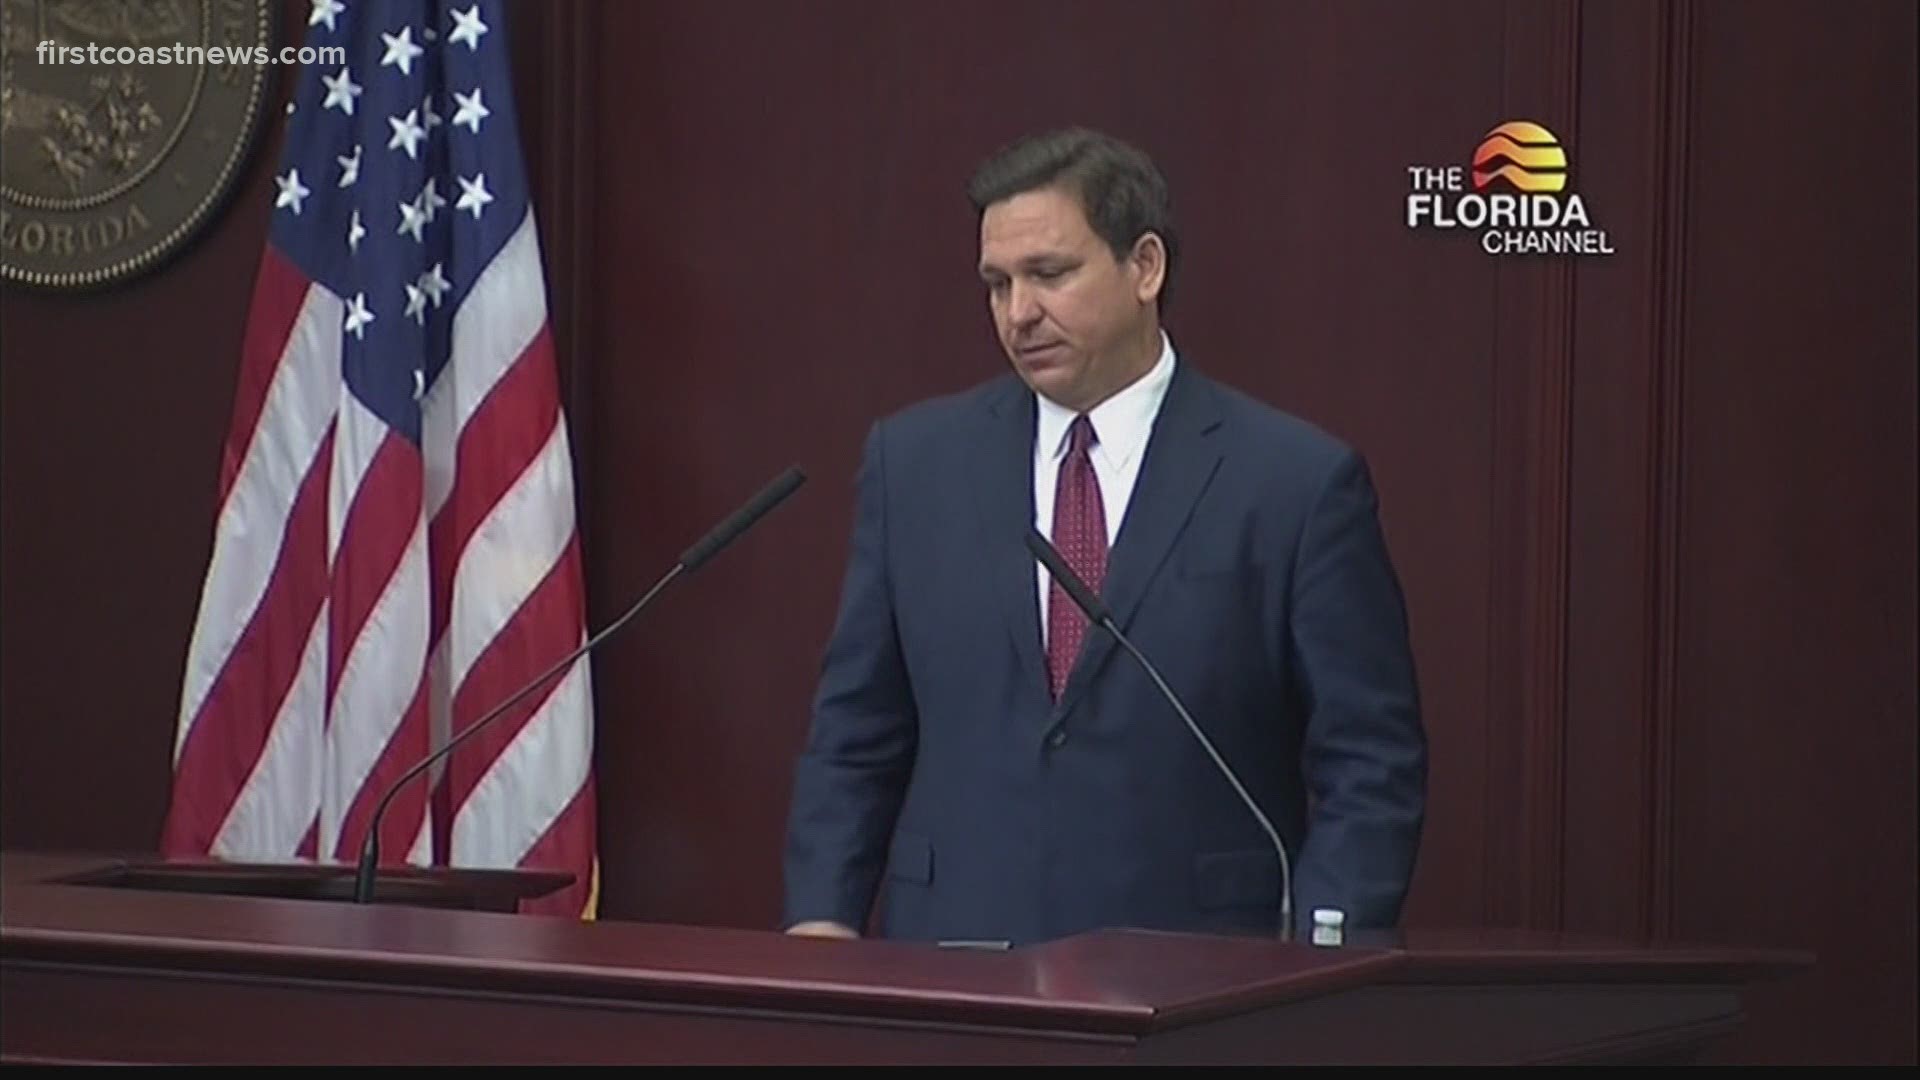 Florida Governor Ron DeSantis delivered his State of the State Address on Tuesday in the chamber of the Florida House of Representatives in Tallahassee.